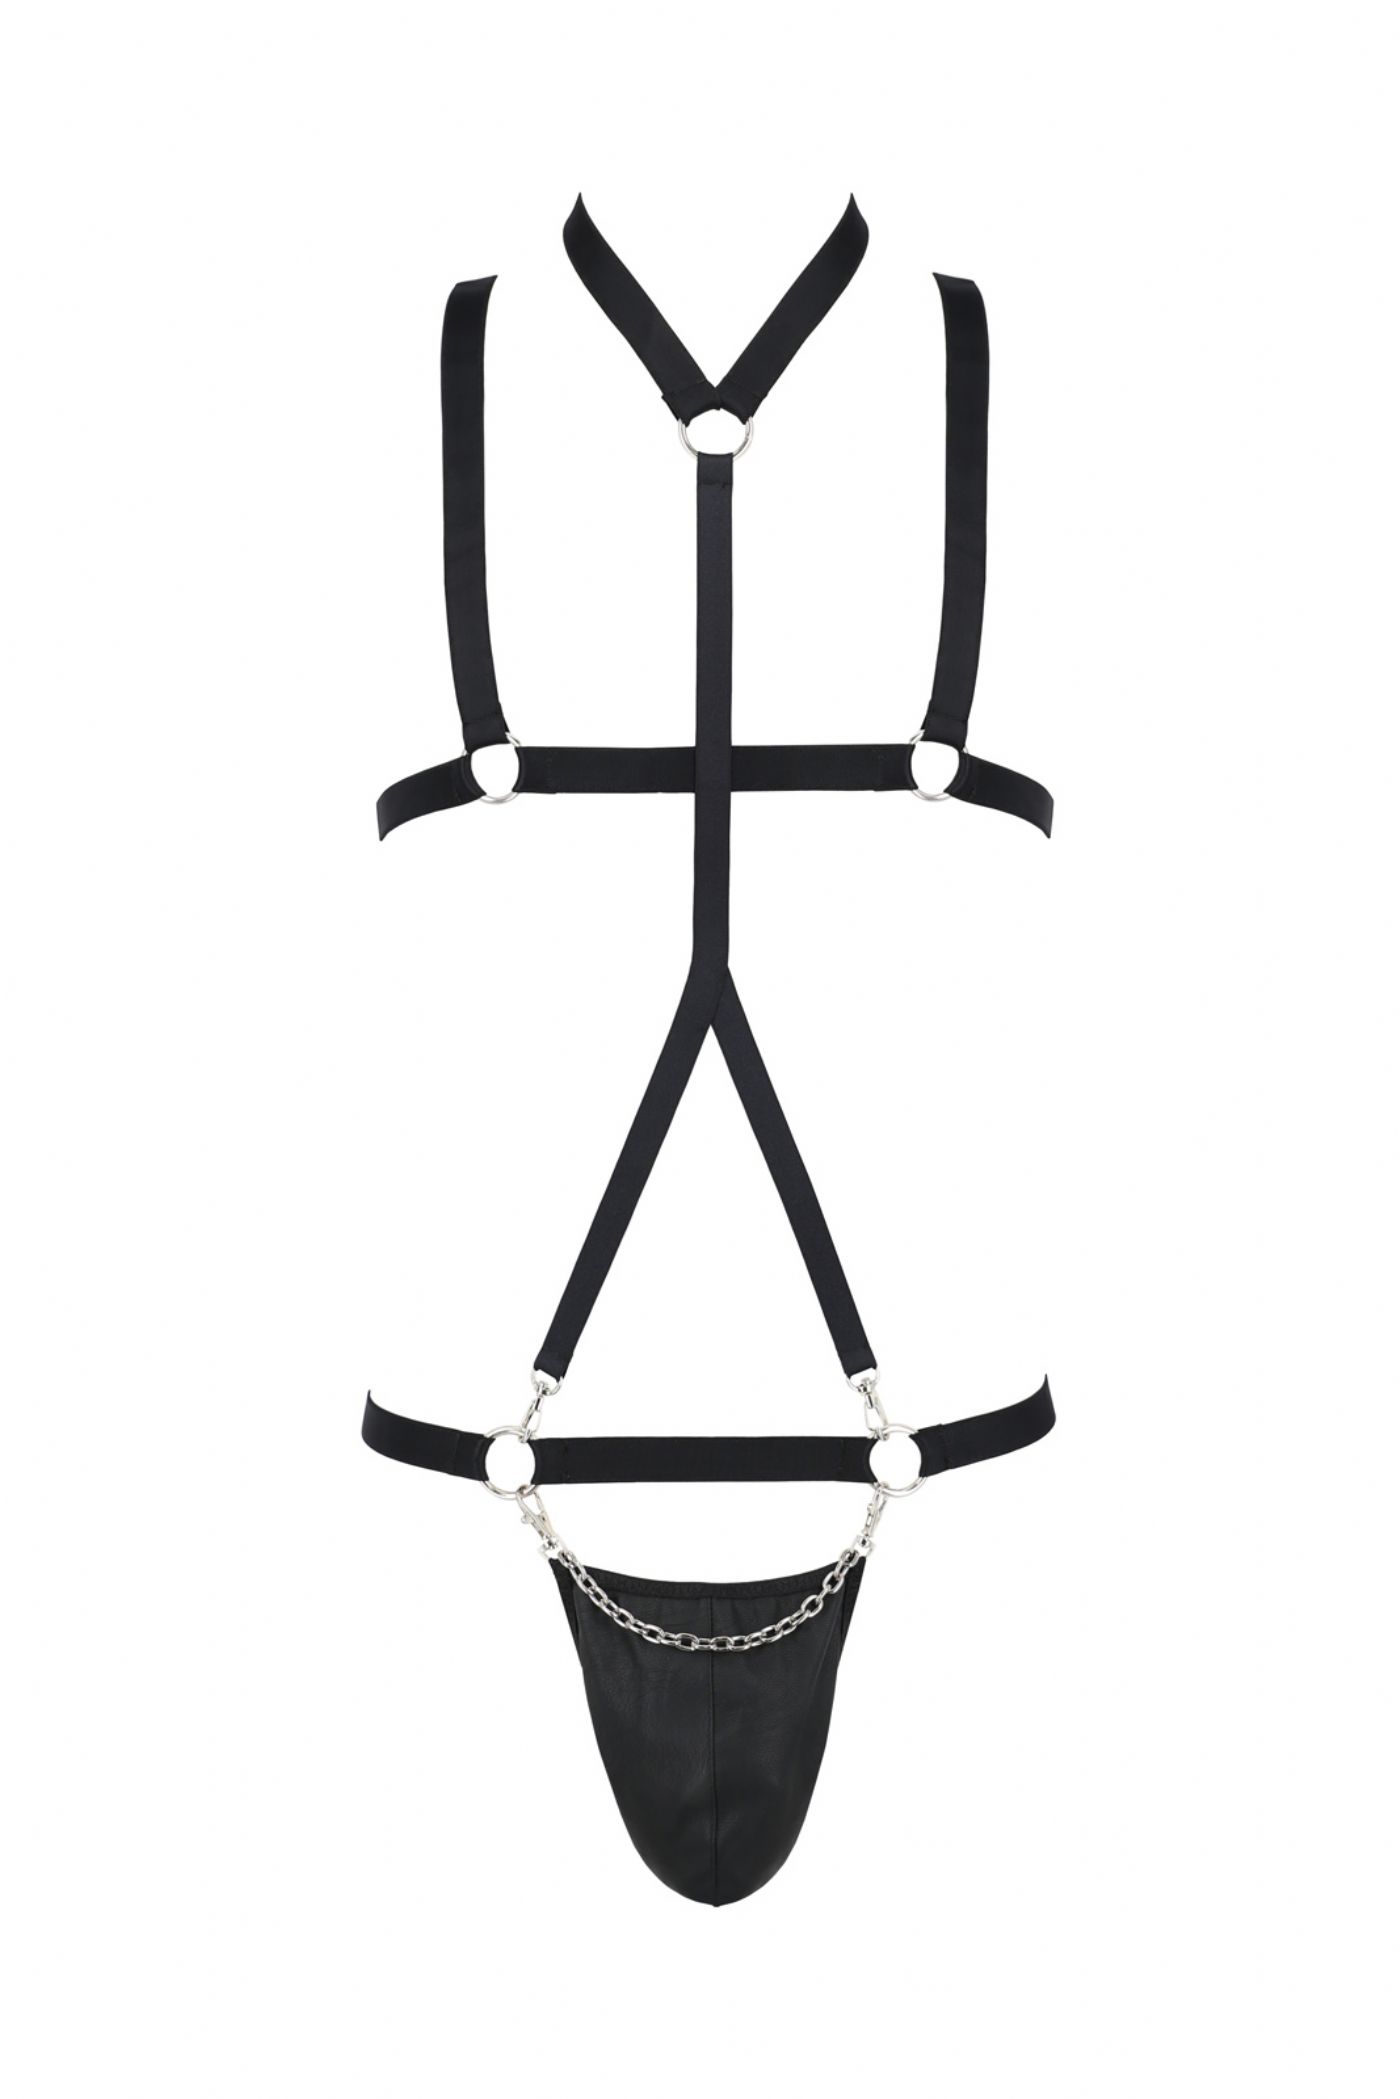 Andrew Thong/Harness St mnd - sort (PM 039)